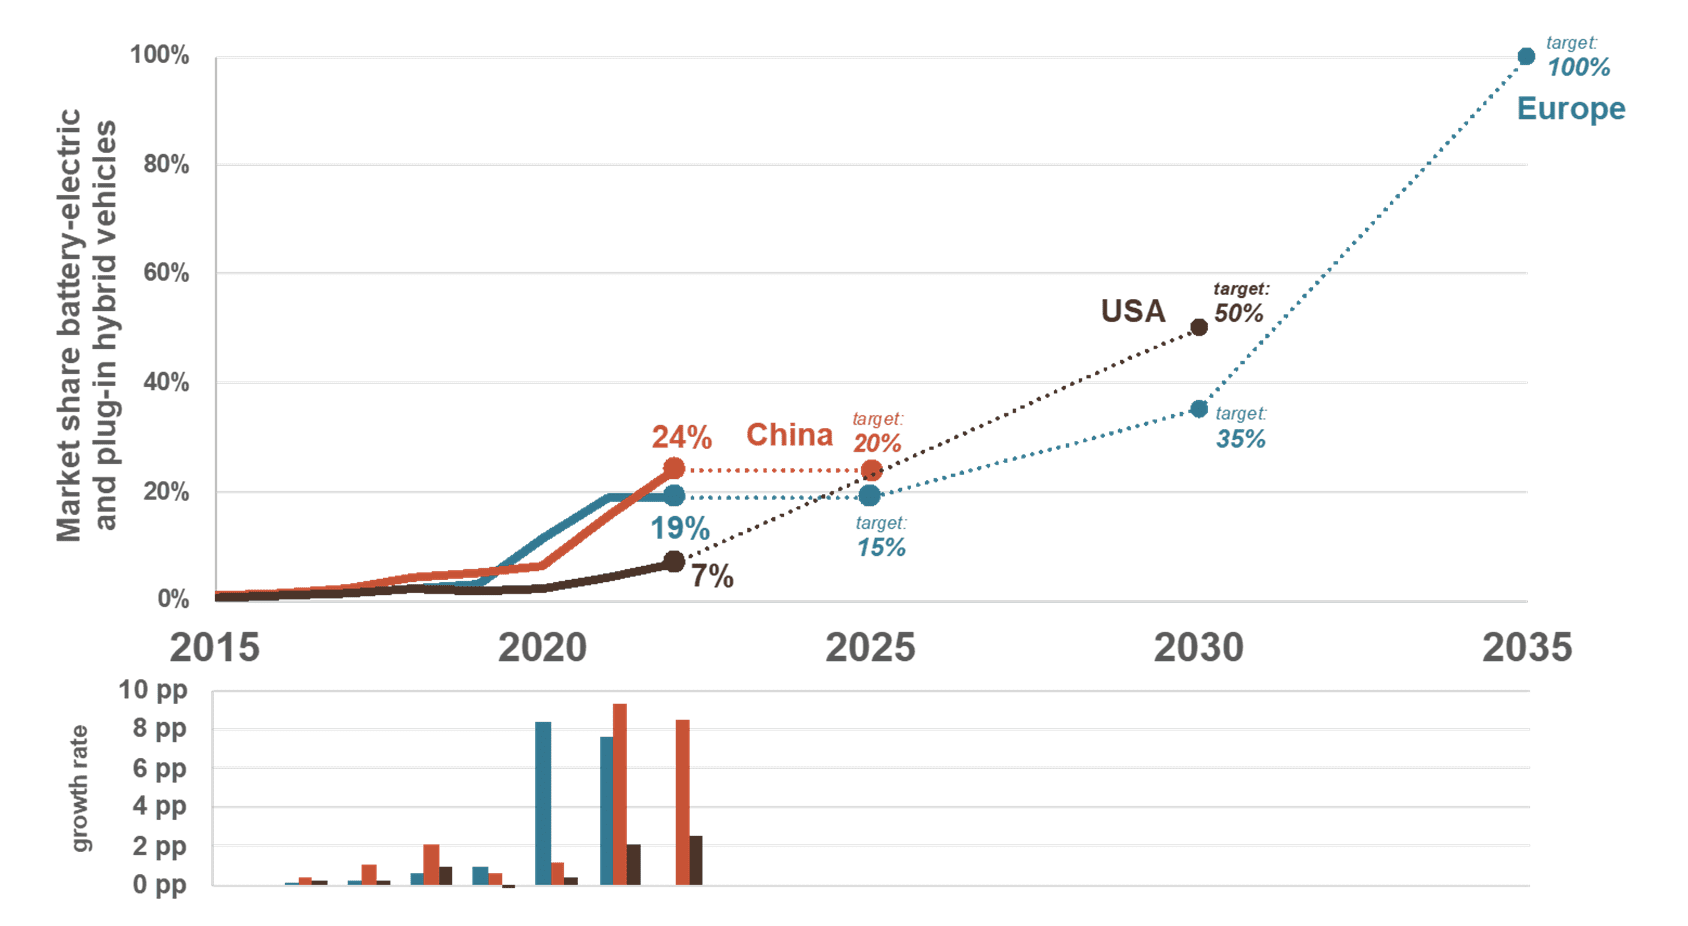 Charts showing EV market development and targets in EU, US, and China